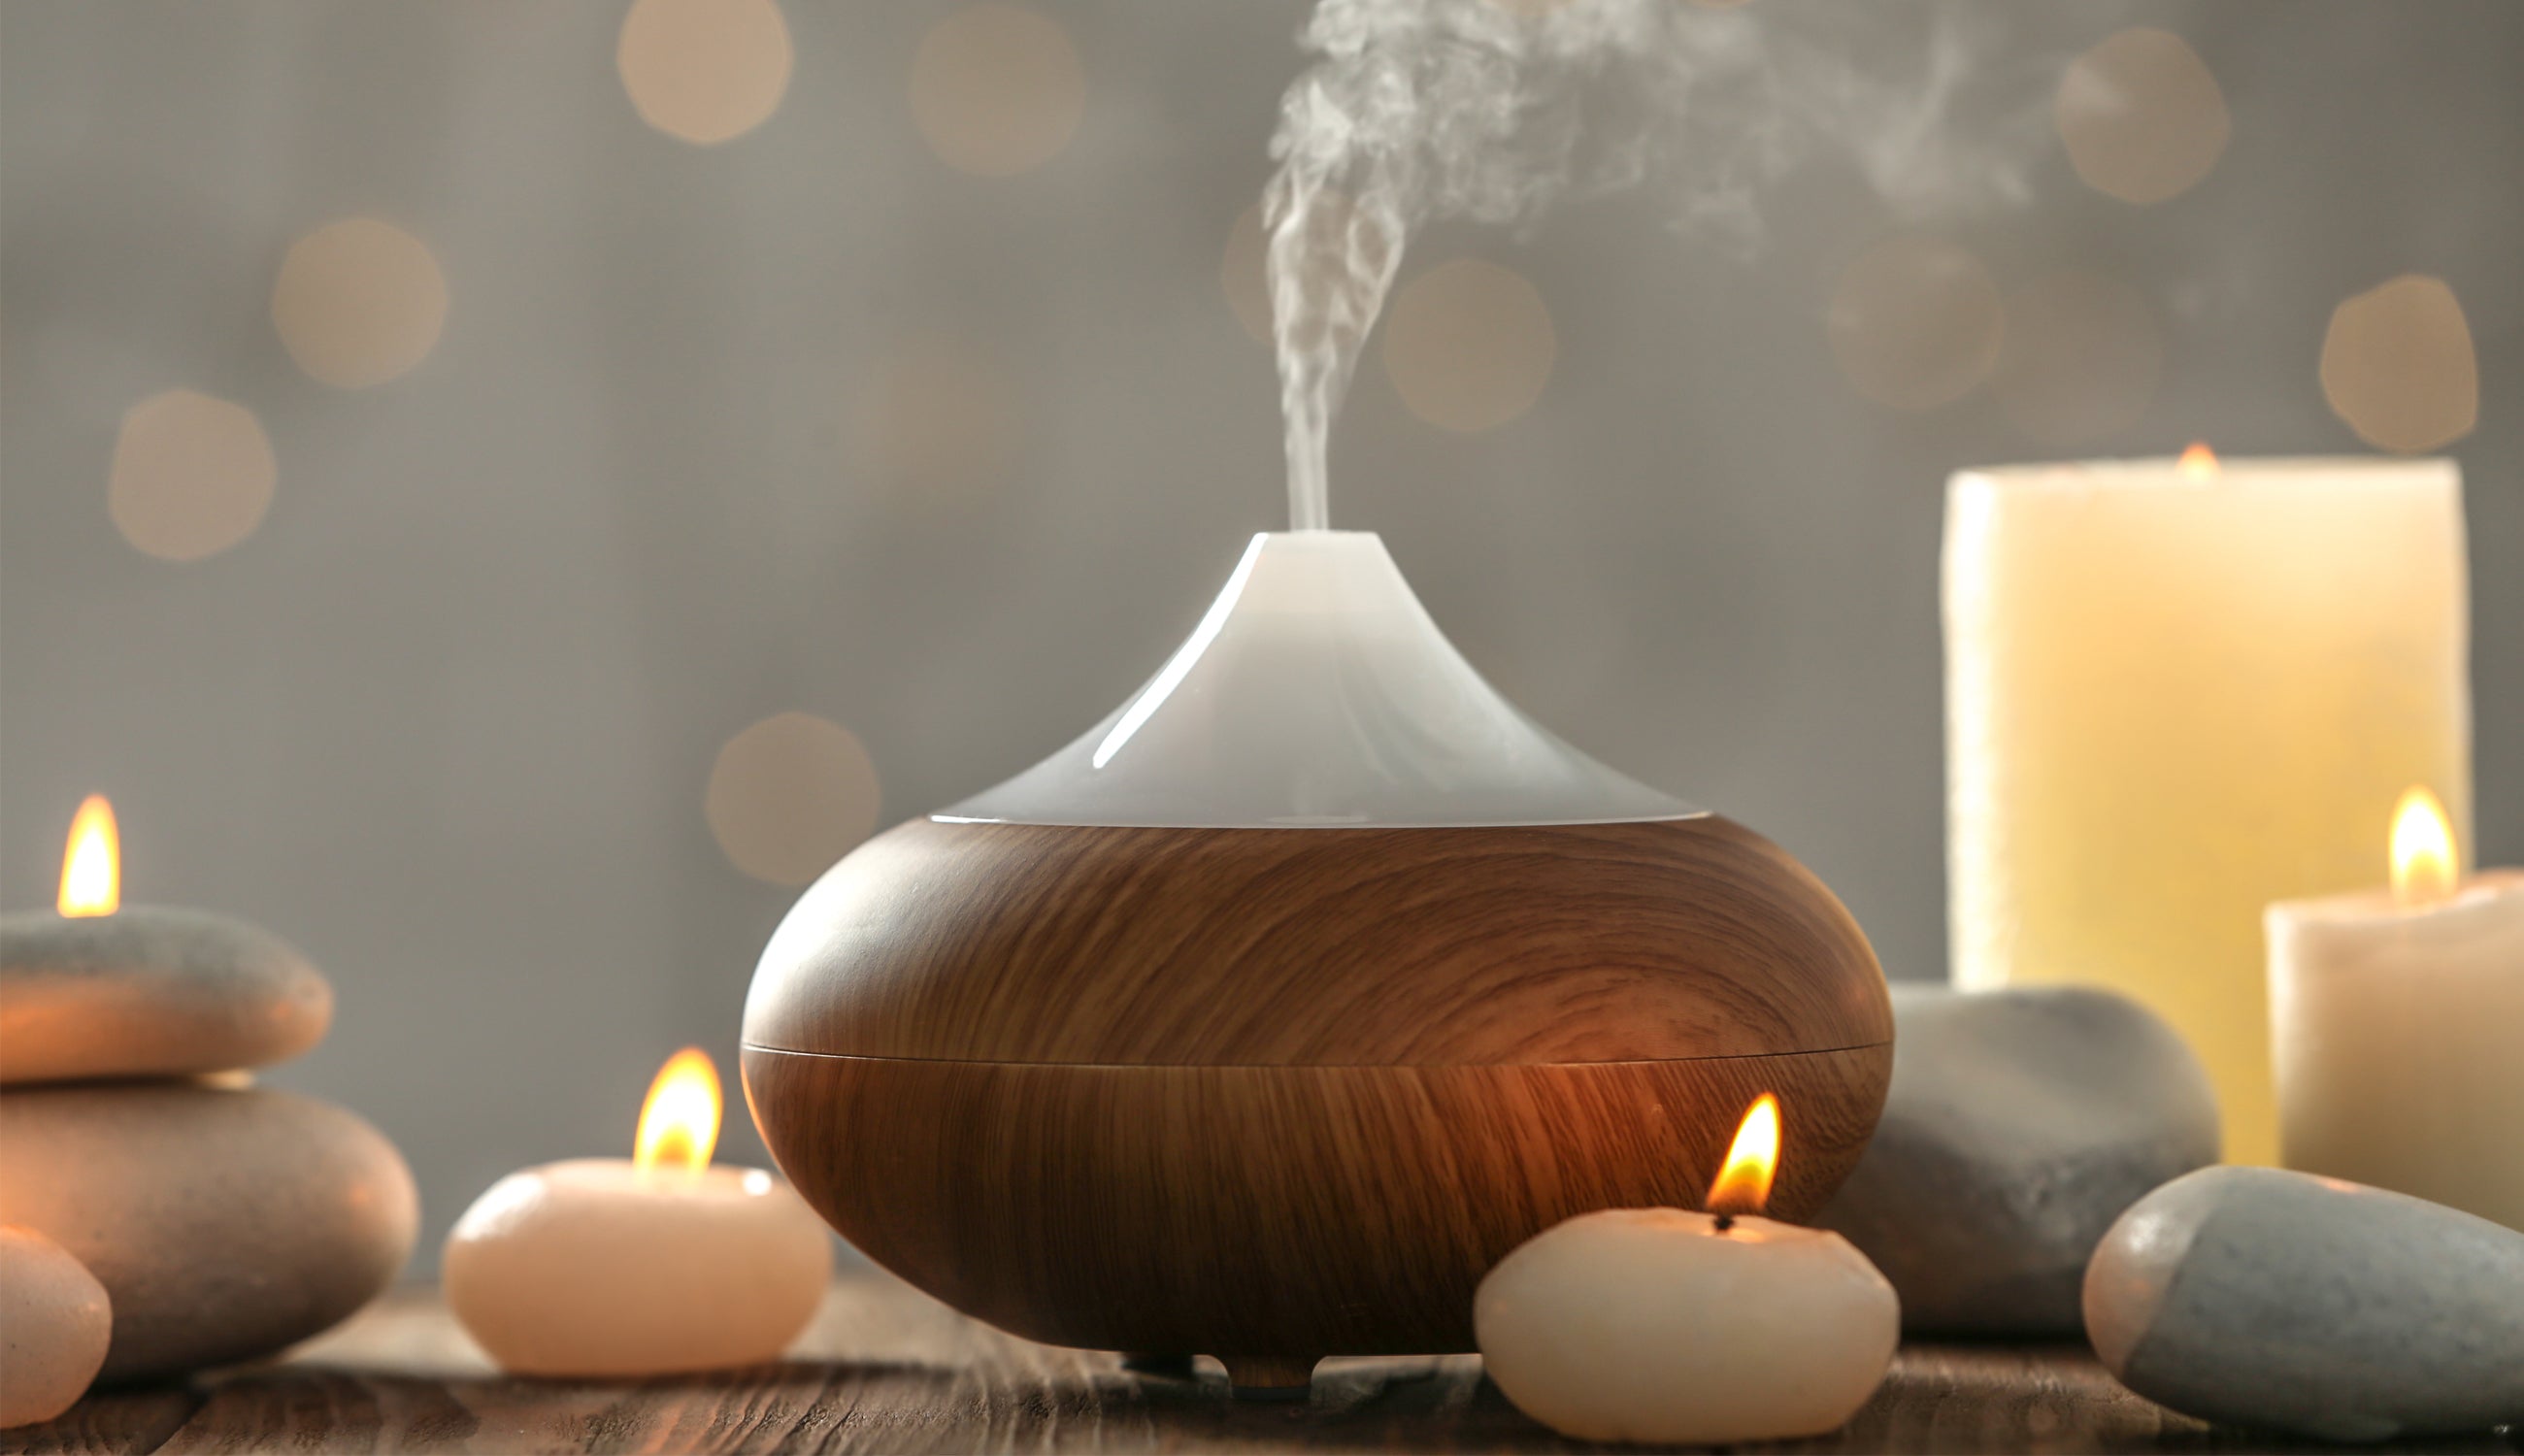 Pampering with an oil diffuser